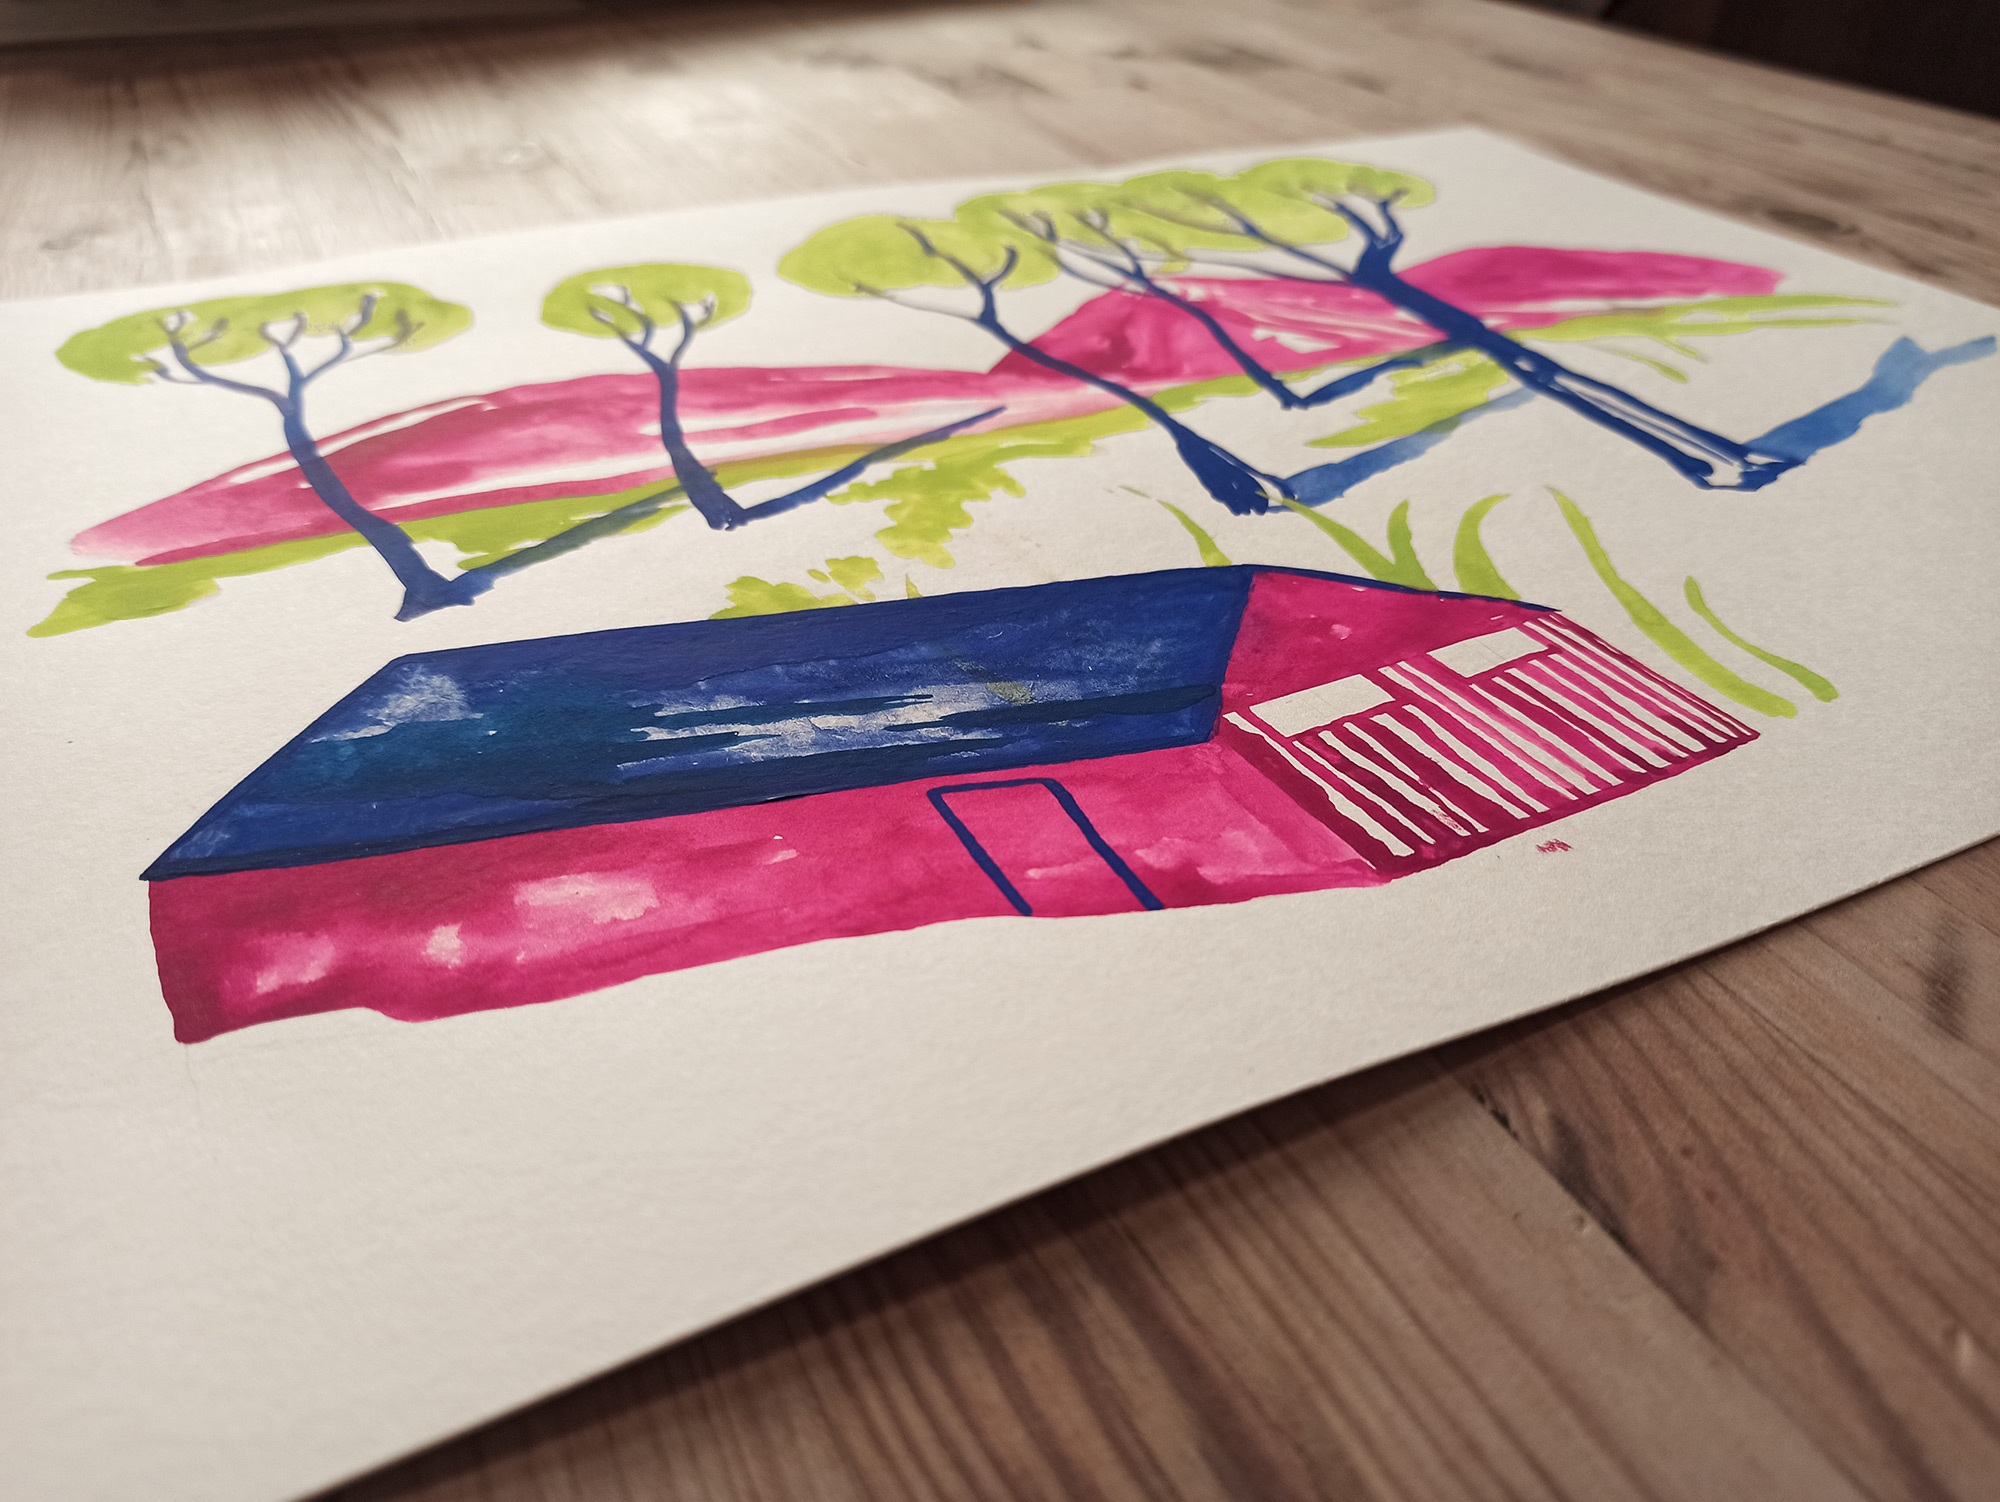 drawings, gouache-painting, watercolor-paintings, aesthetic, figurative, graphical, illustrative, landscape, pop, architecture, botany, nature, people, blue, green, violet, gouache, ink, paper, beautiful, danish, decorative, design, forest, houses, interior, interior-design, modern, mountains, nordic, plants, posters, pretty, prints, scandinavien, trees, Buy original high quality art. Paintings, drawings, limited edition prints & posters by talented artists.